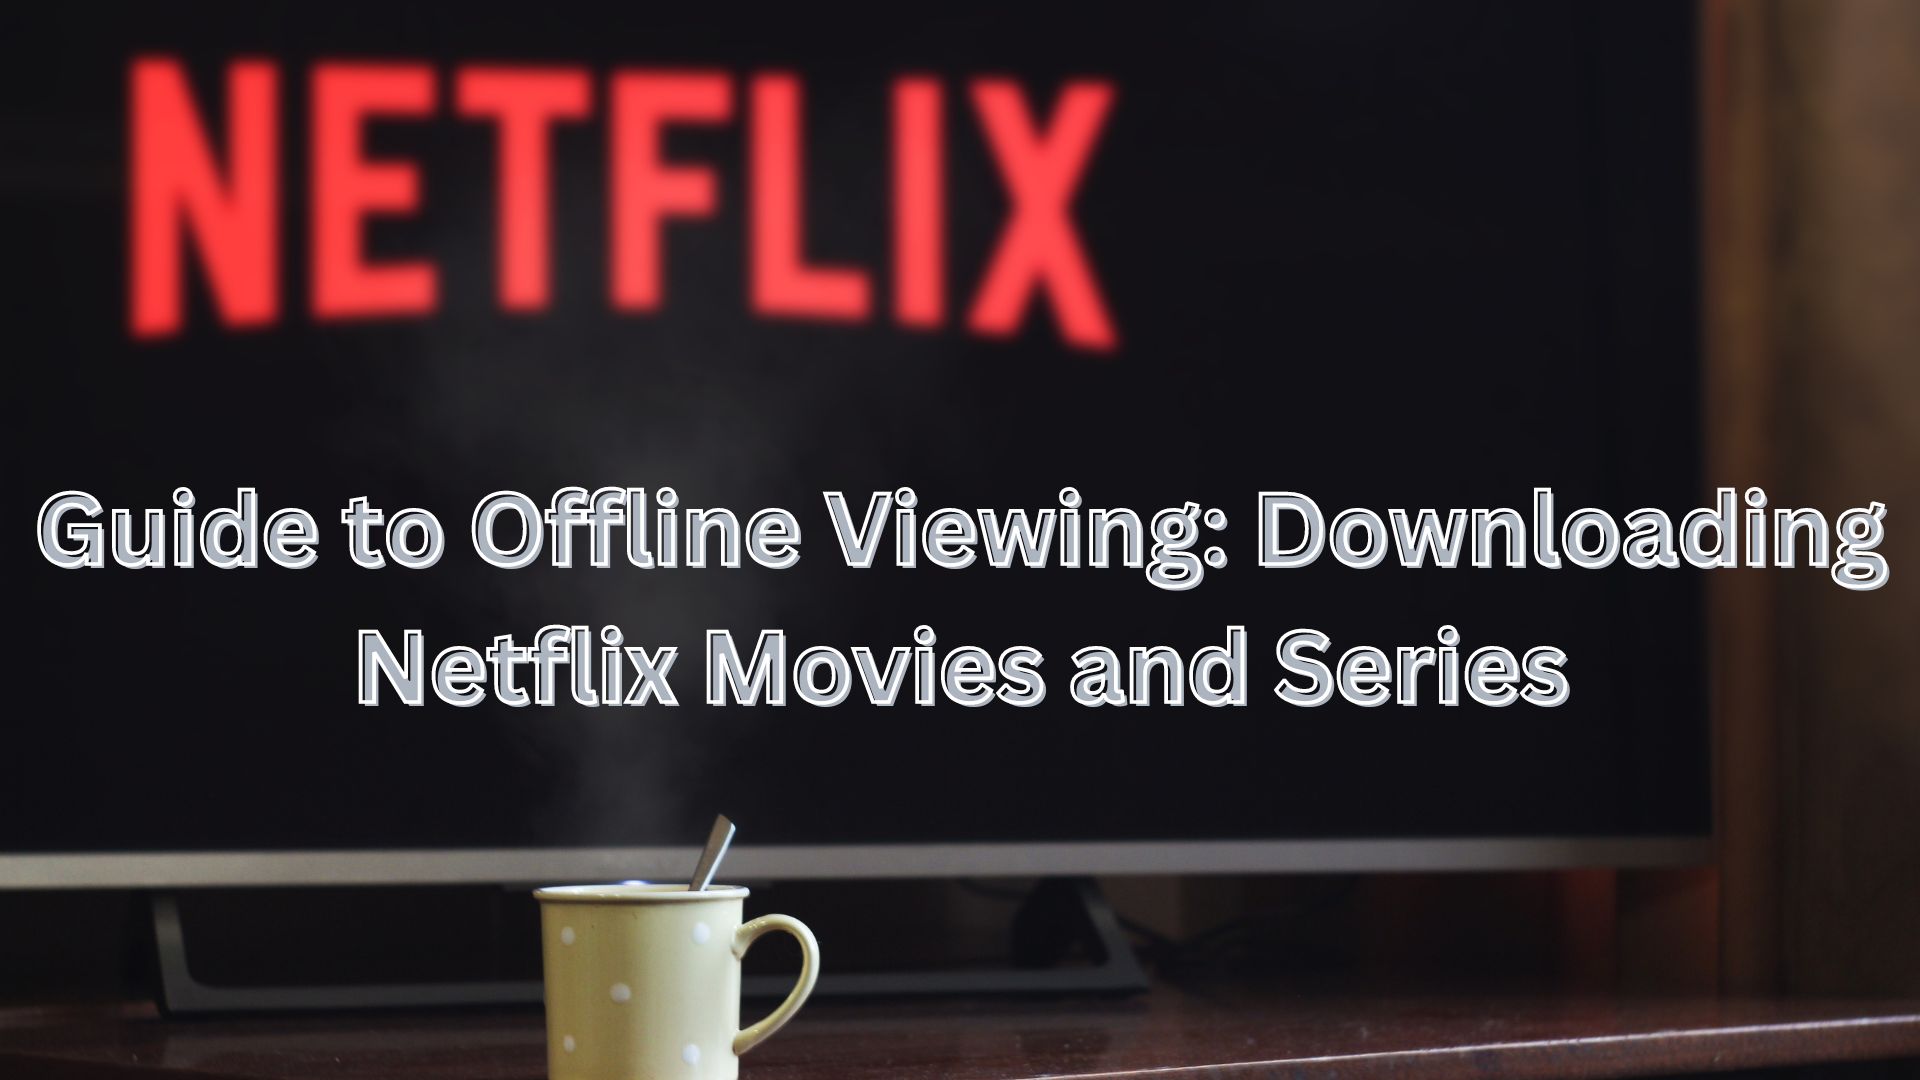 Guide to Offline Viewing: Downloading Netflix Movies and Series